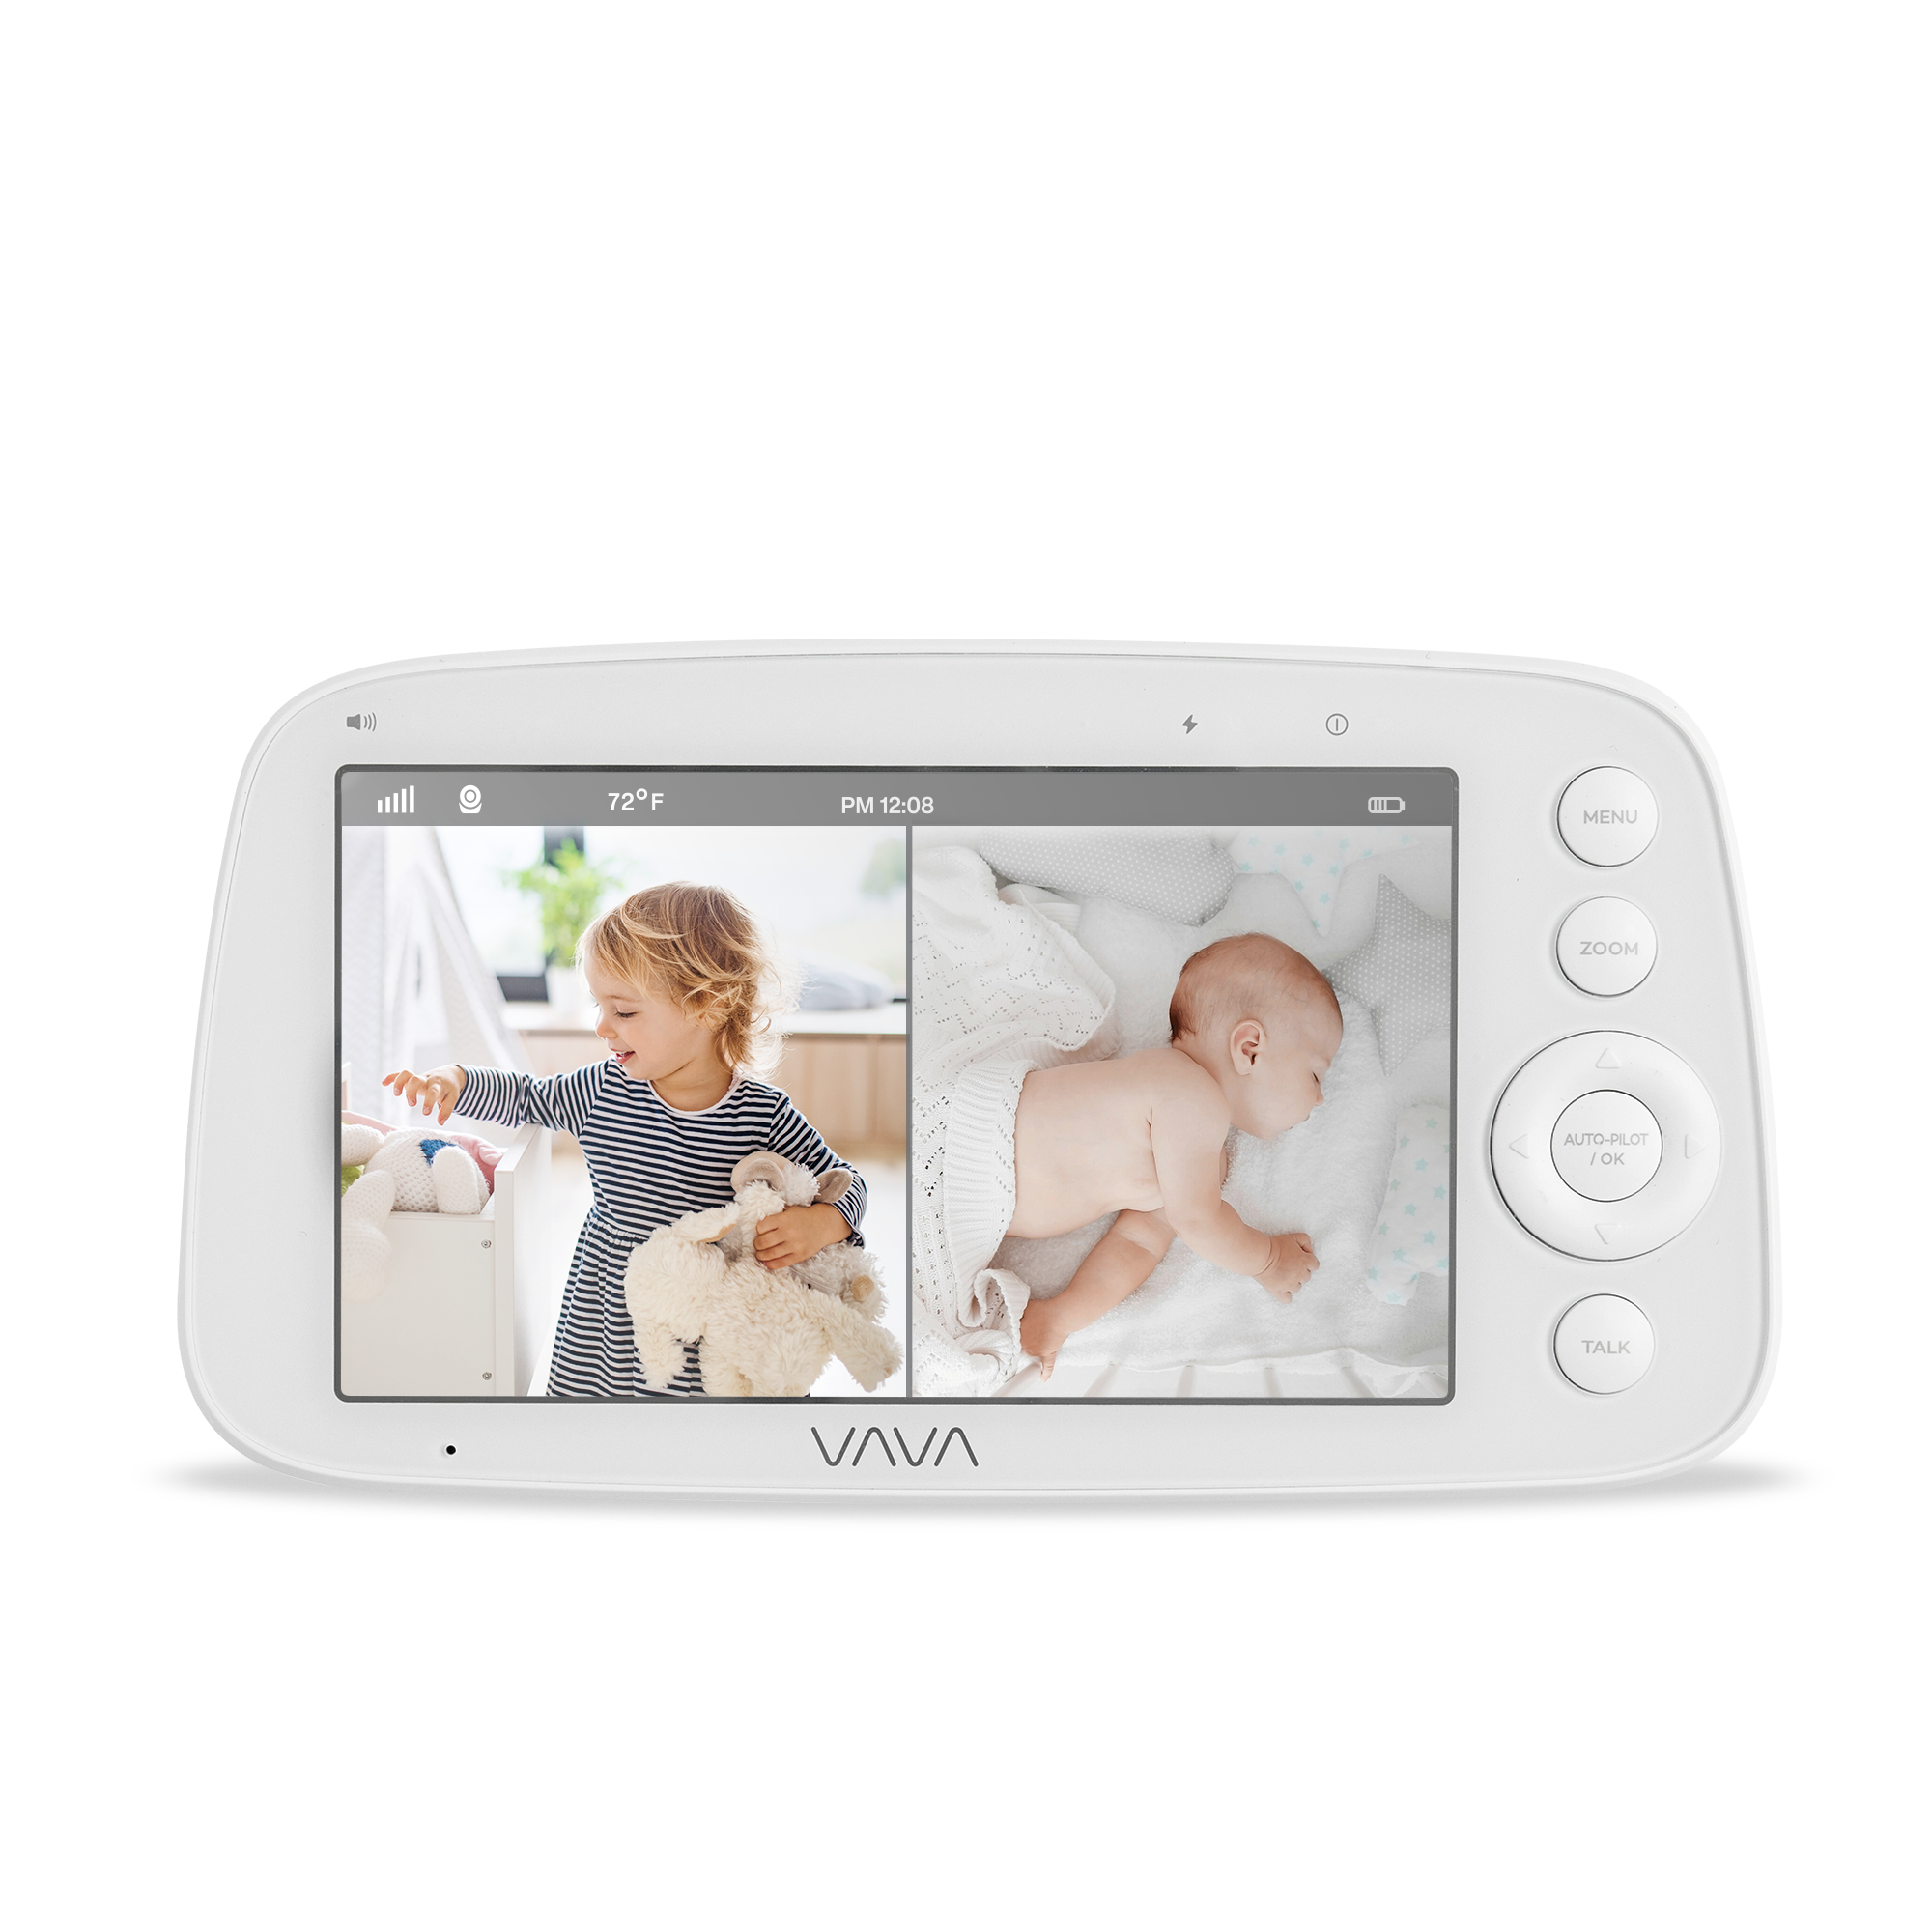 VAVA Baby Monitor Parent Unit with a sleeping baby on the screen